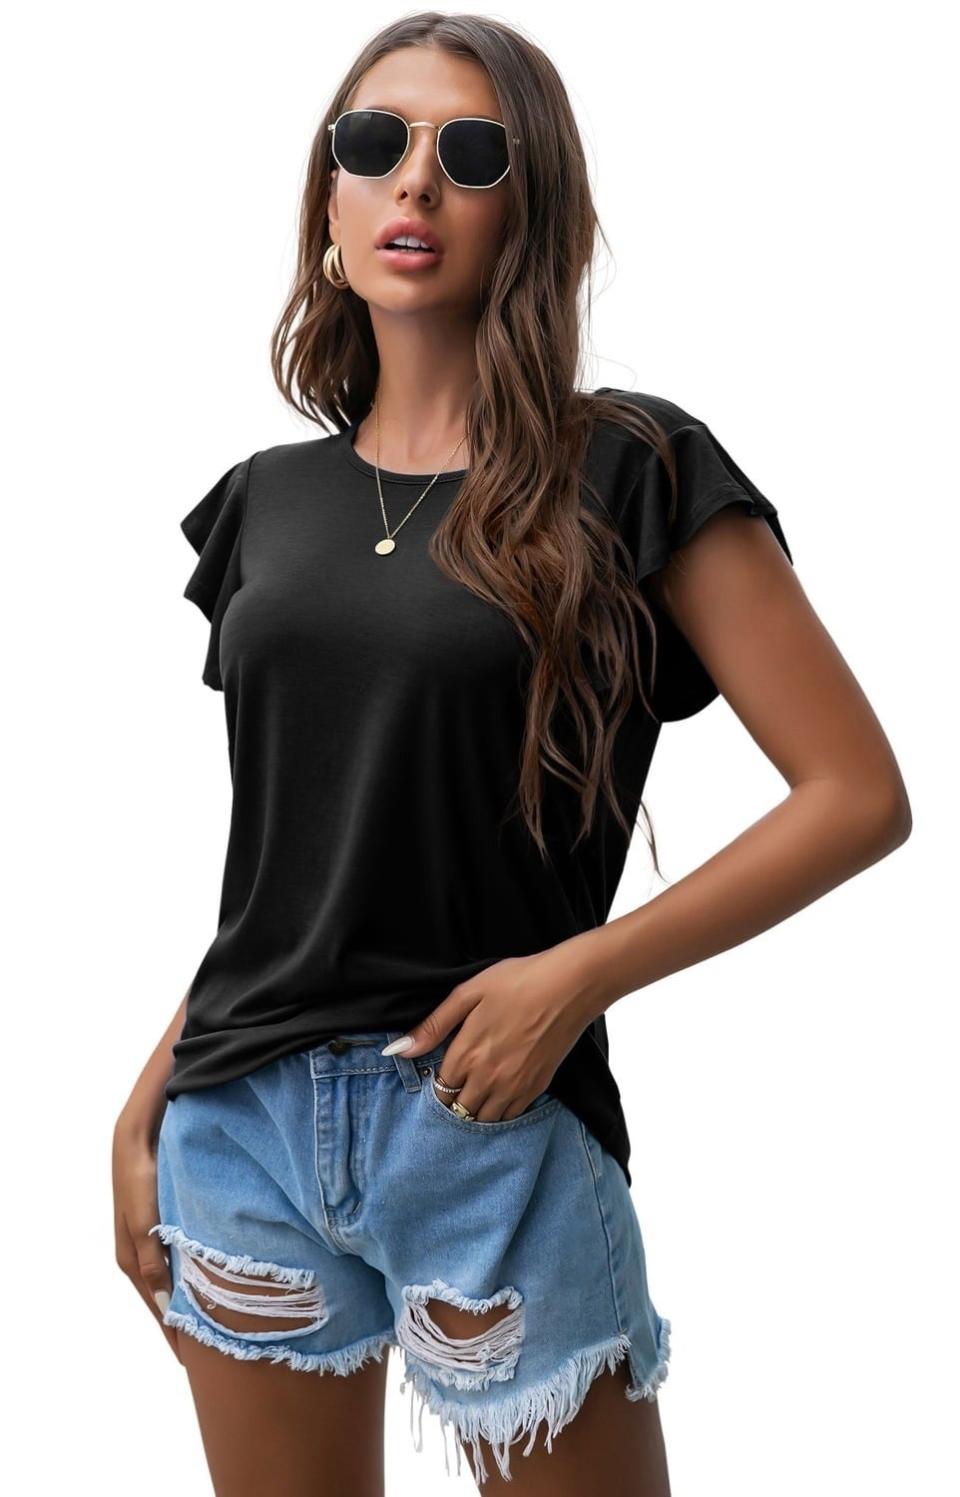 model wearing sunglasses, a black top with ruffle sleeves tucked into distressed denim shorts